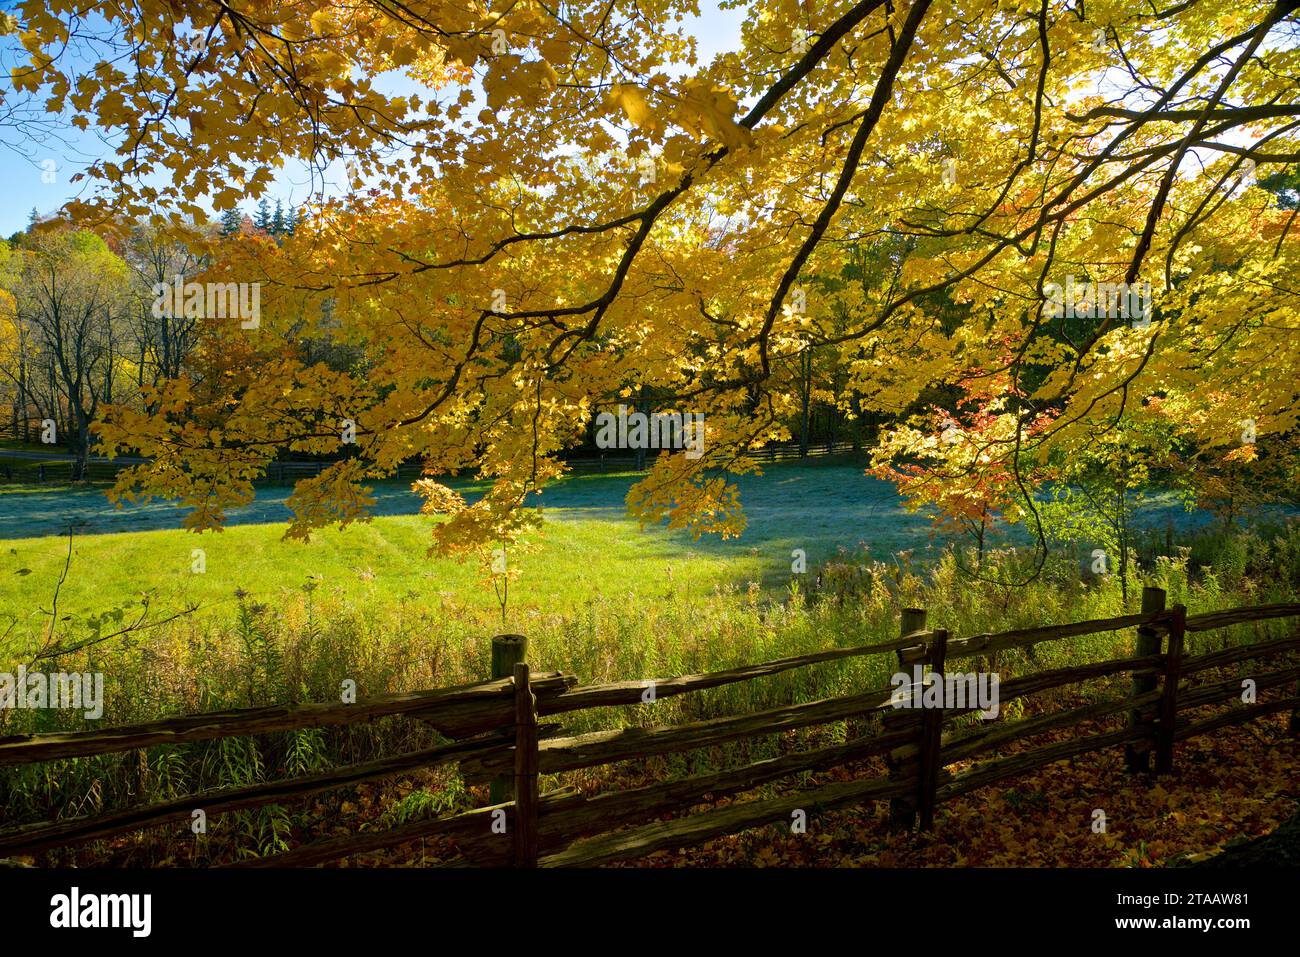 Autumn maple trees in rural countryside with fences Stock Photo